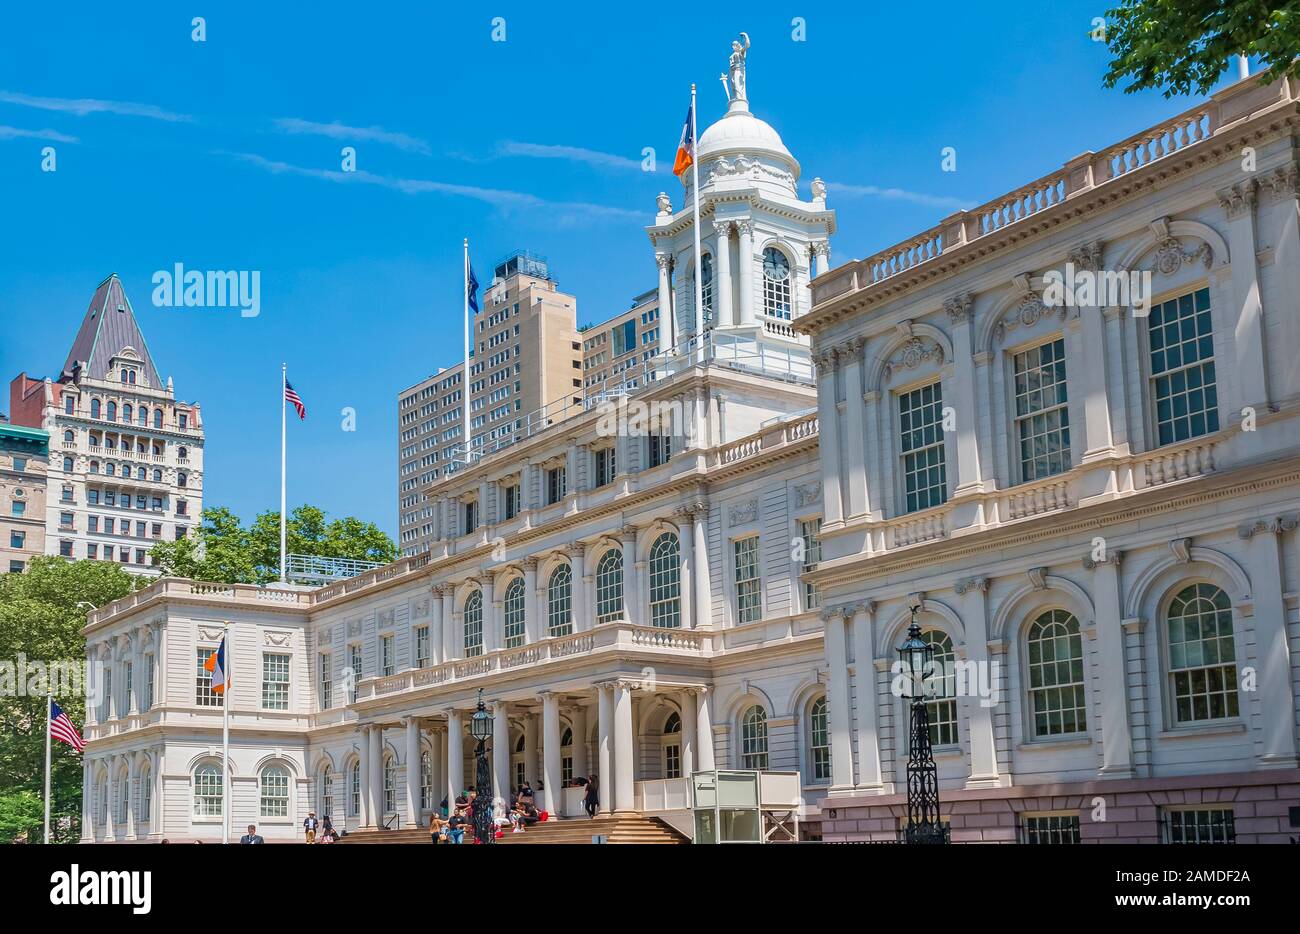 New York - June 2, 2016: Facade of the City Hall and Manhattan Municipal Building in lower Manhattan with people on the steps Stock Photo